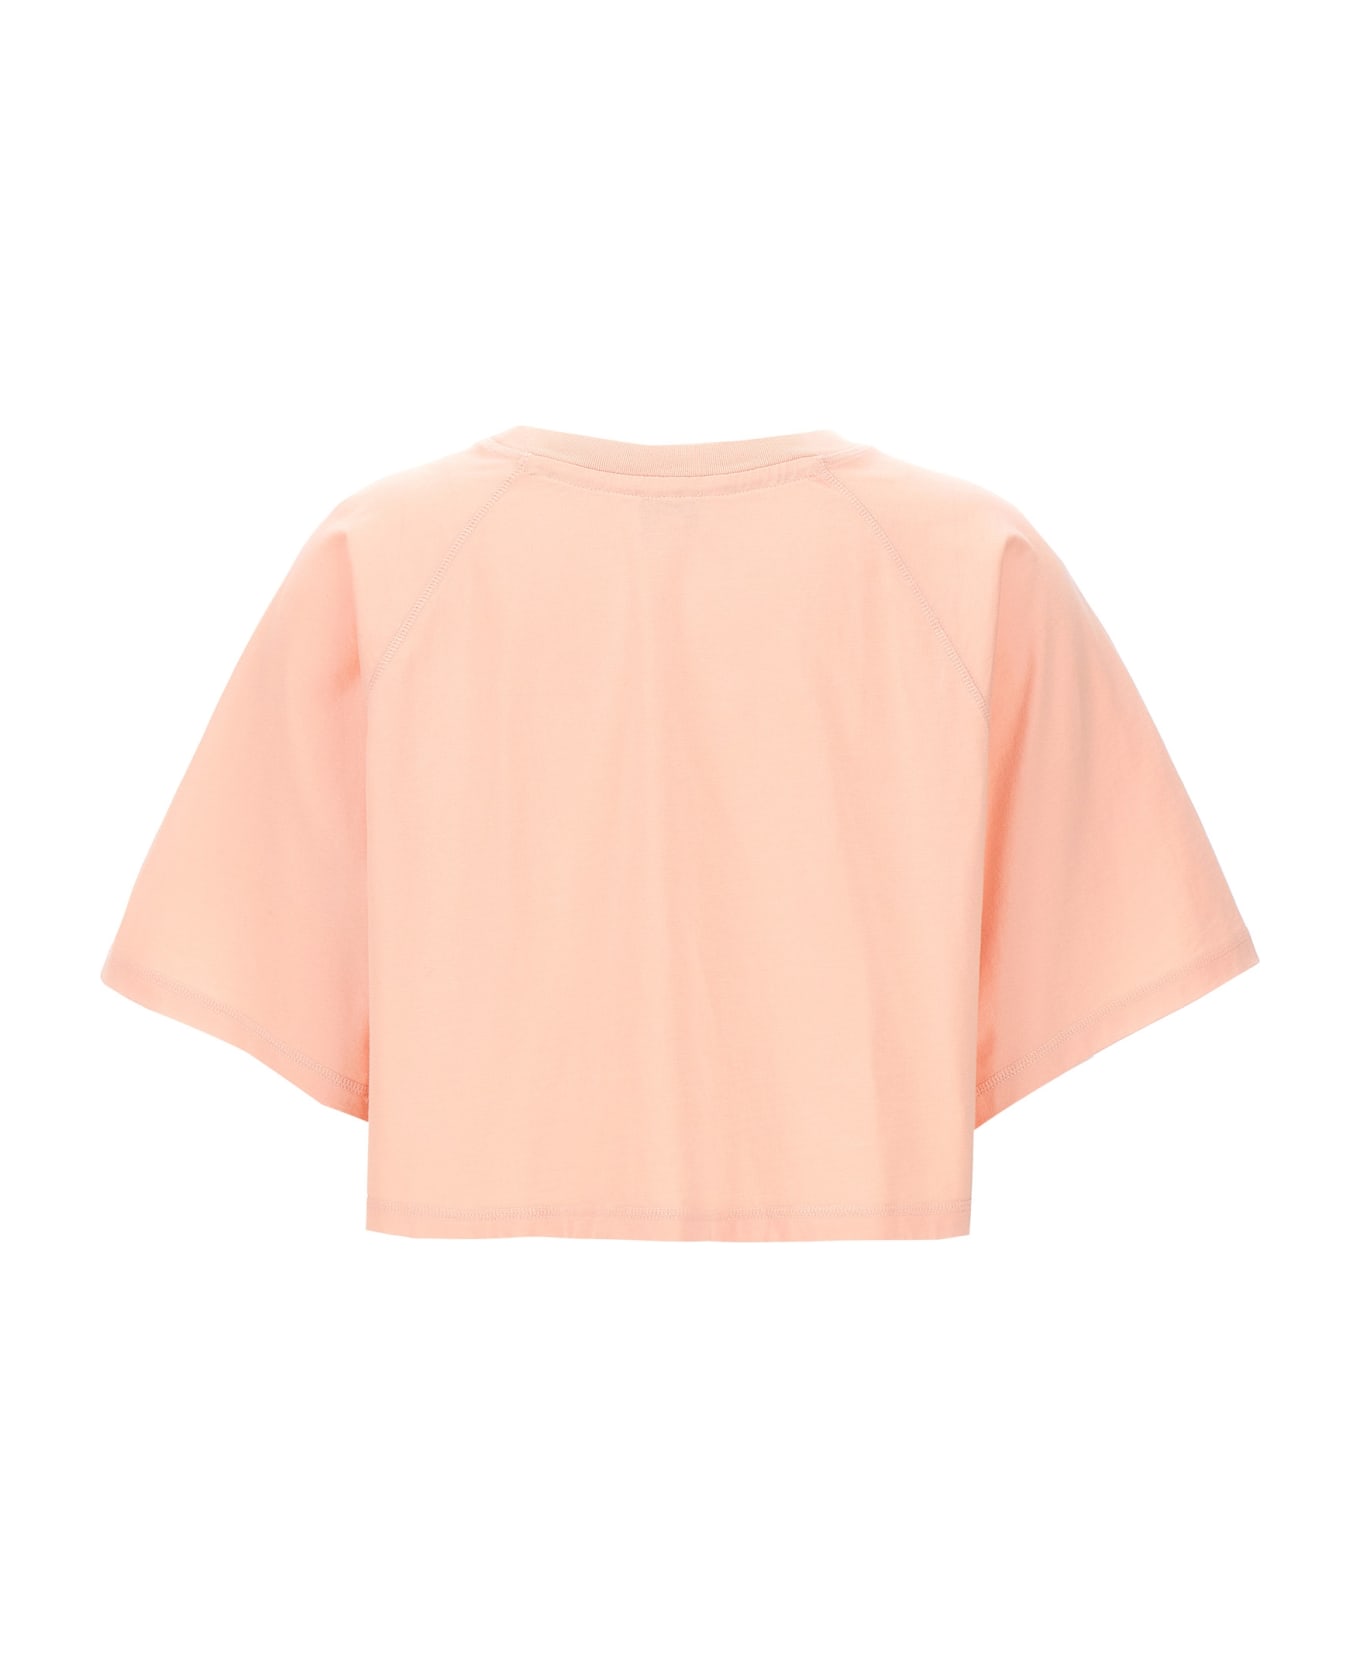 Kenzo Cropped T-shirt - Faded pink Tシャツ